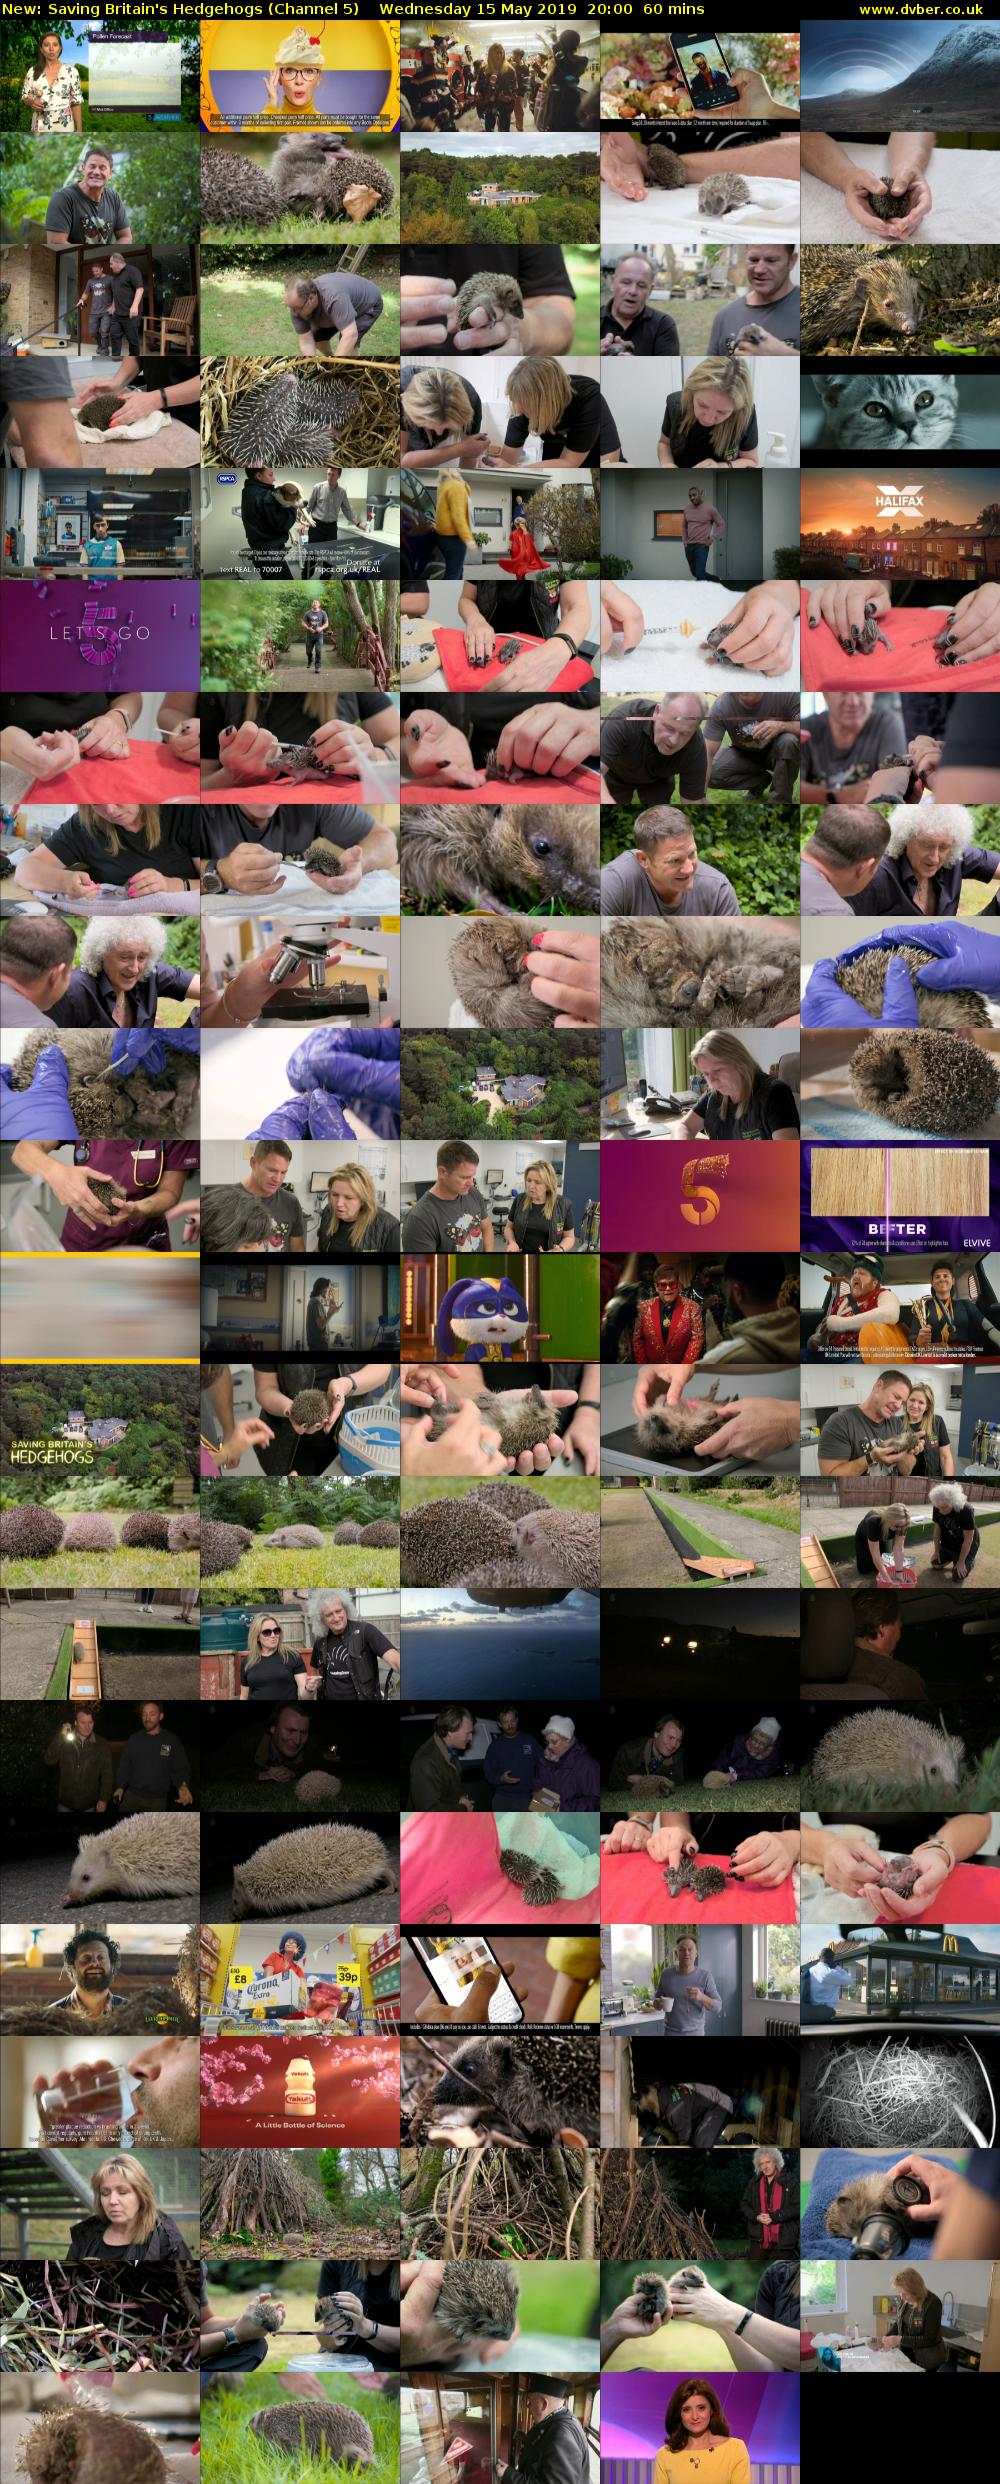 Saving Britain's Hedgehogs (Channel 5) Wednesday 15 May 2019 20:00 - 21:00